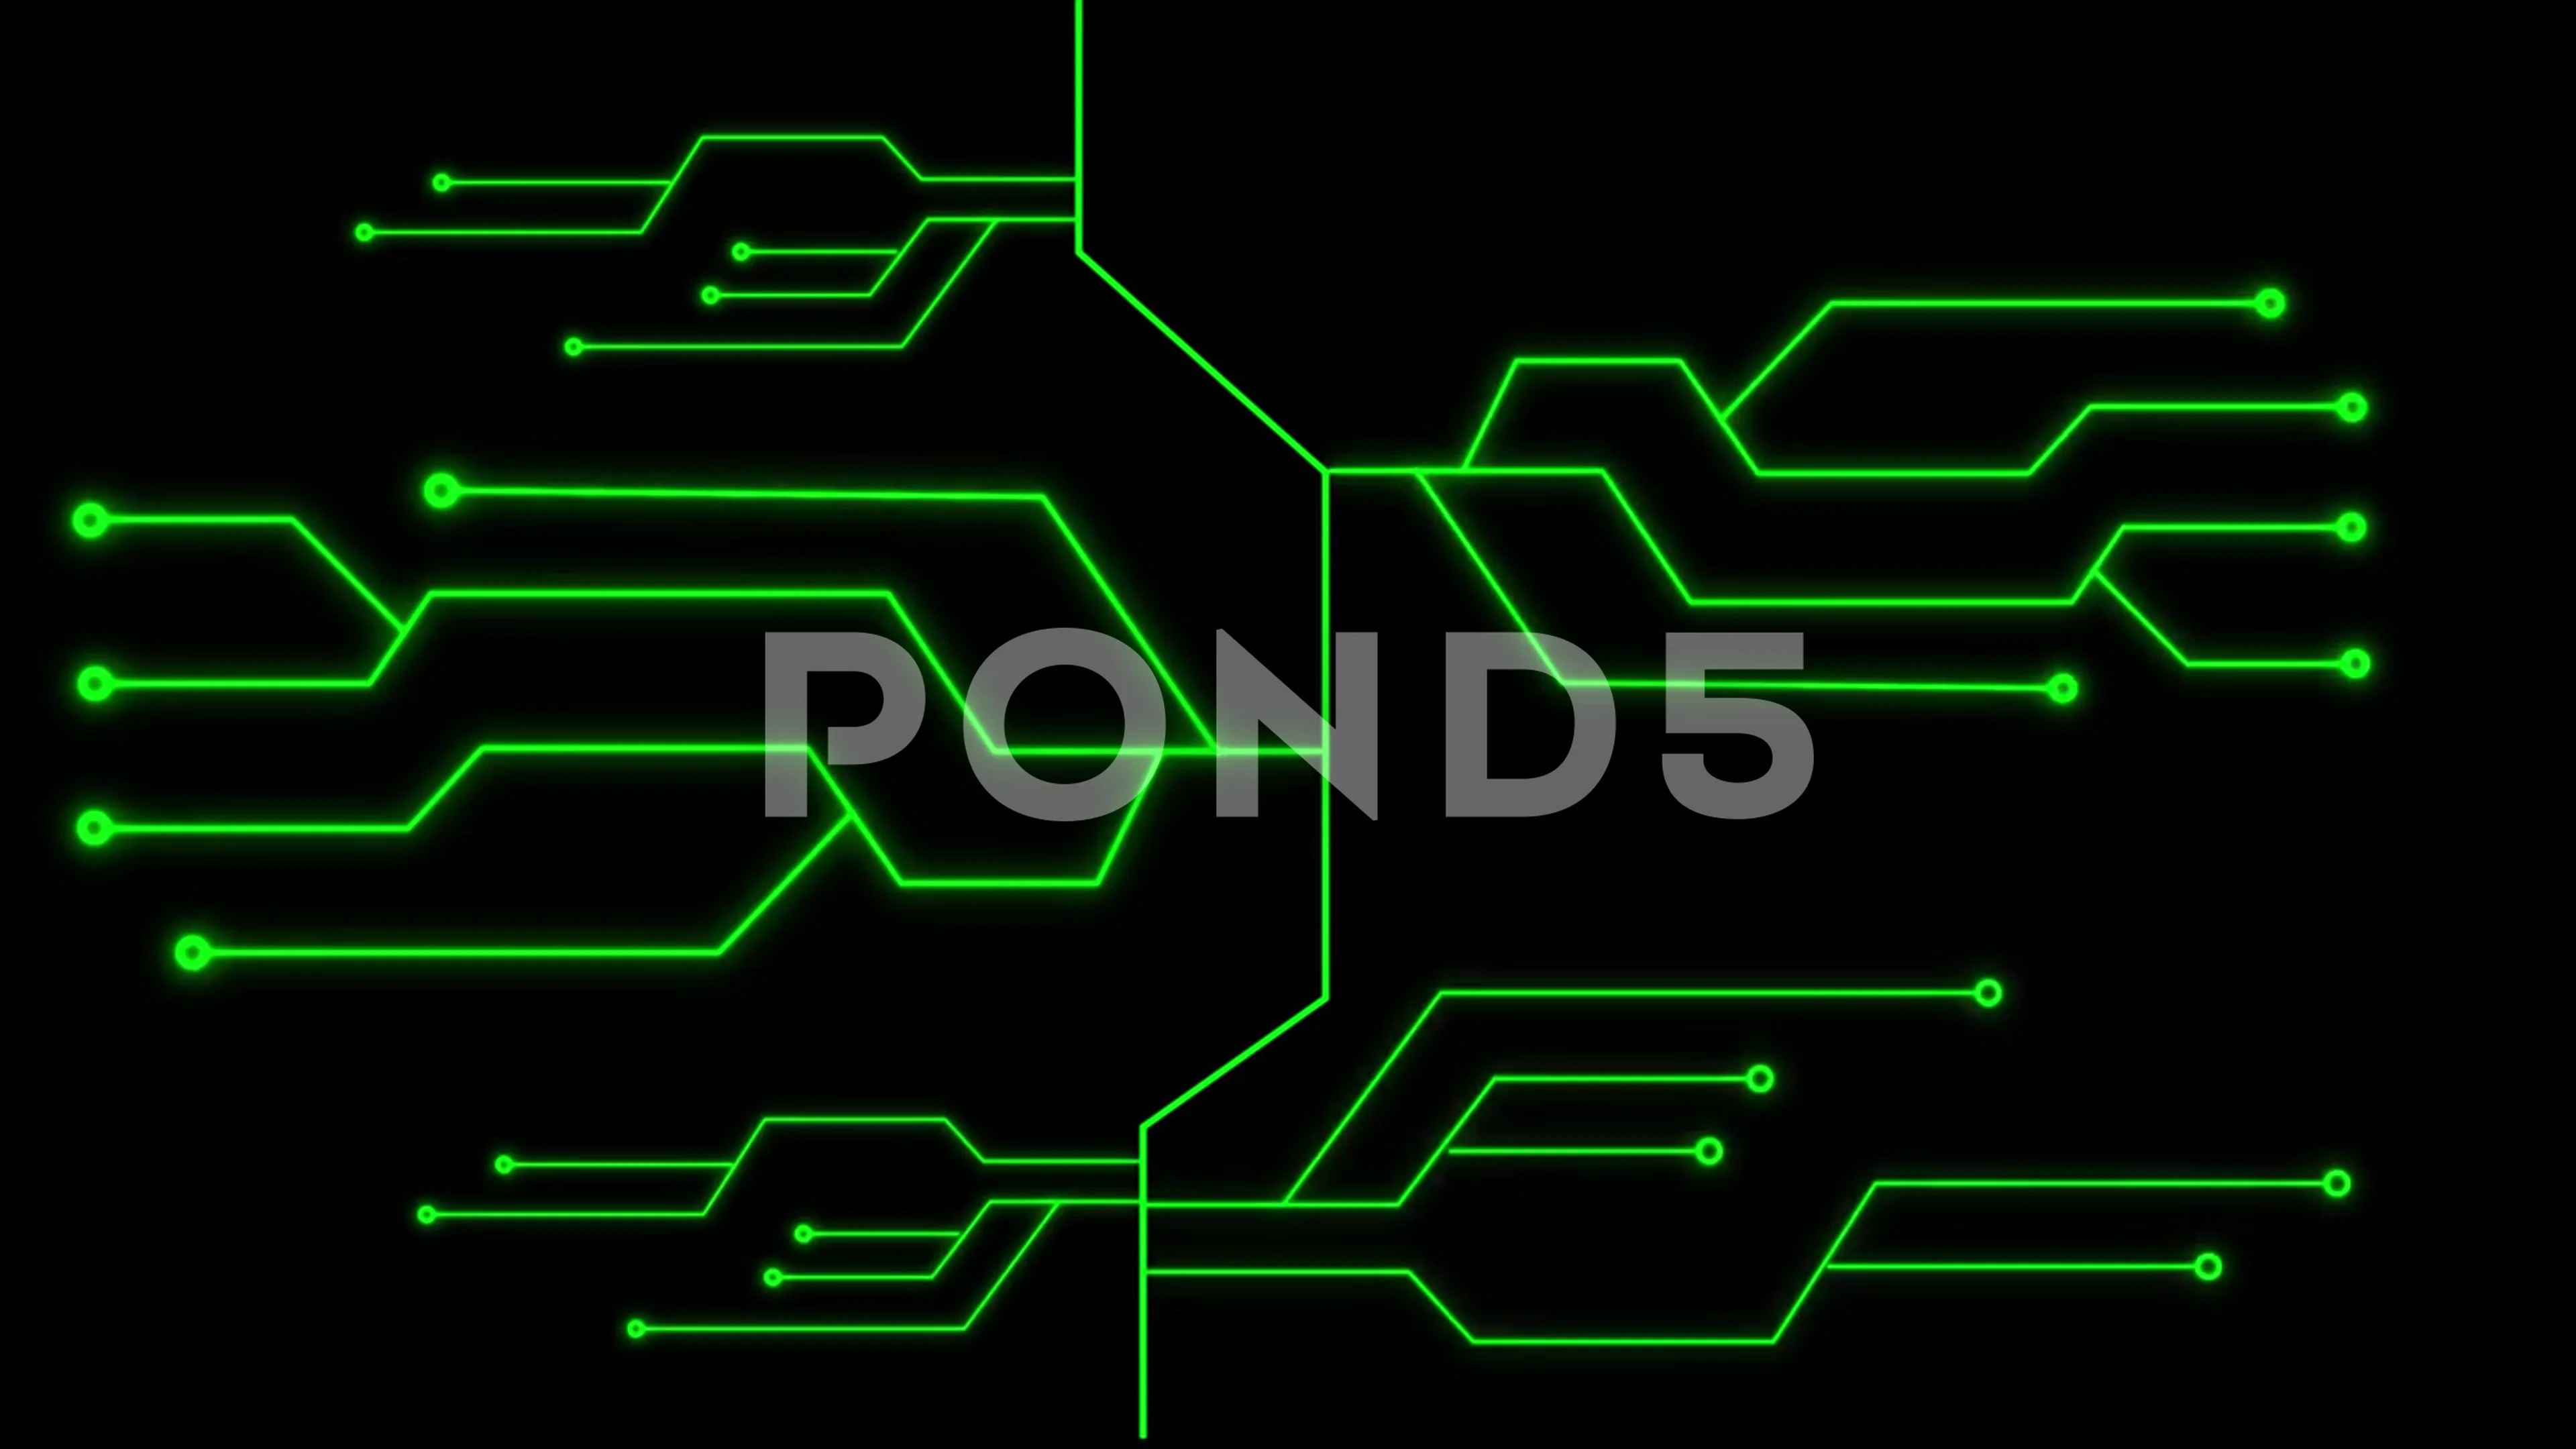 green motherboard background